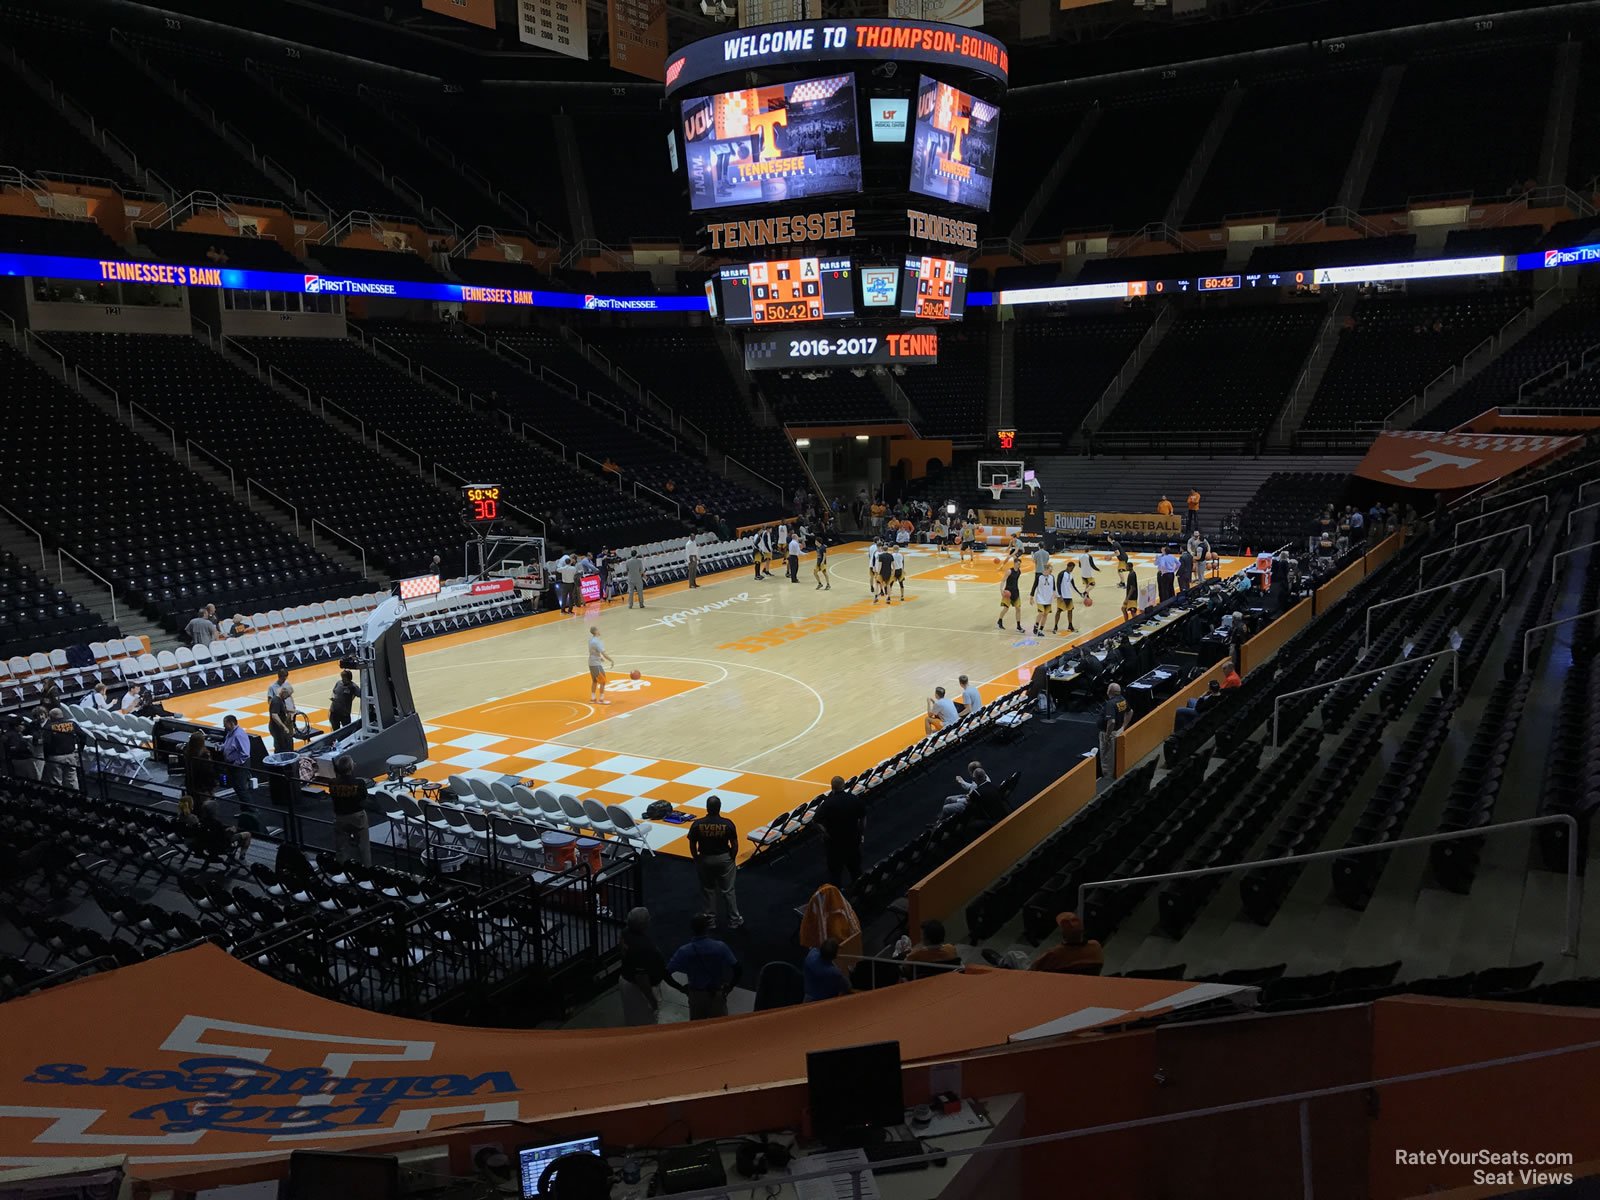 Thompson-Boling Arena Section 110 - RateYourSeats.com